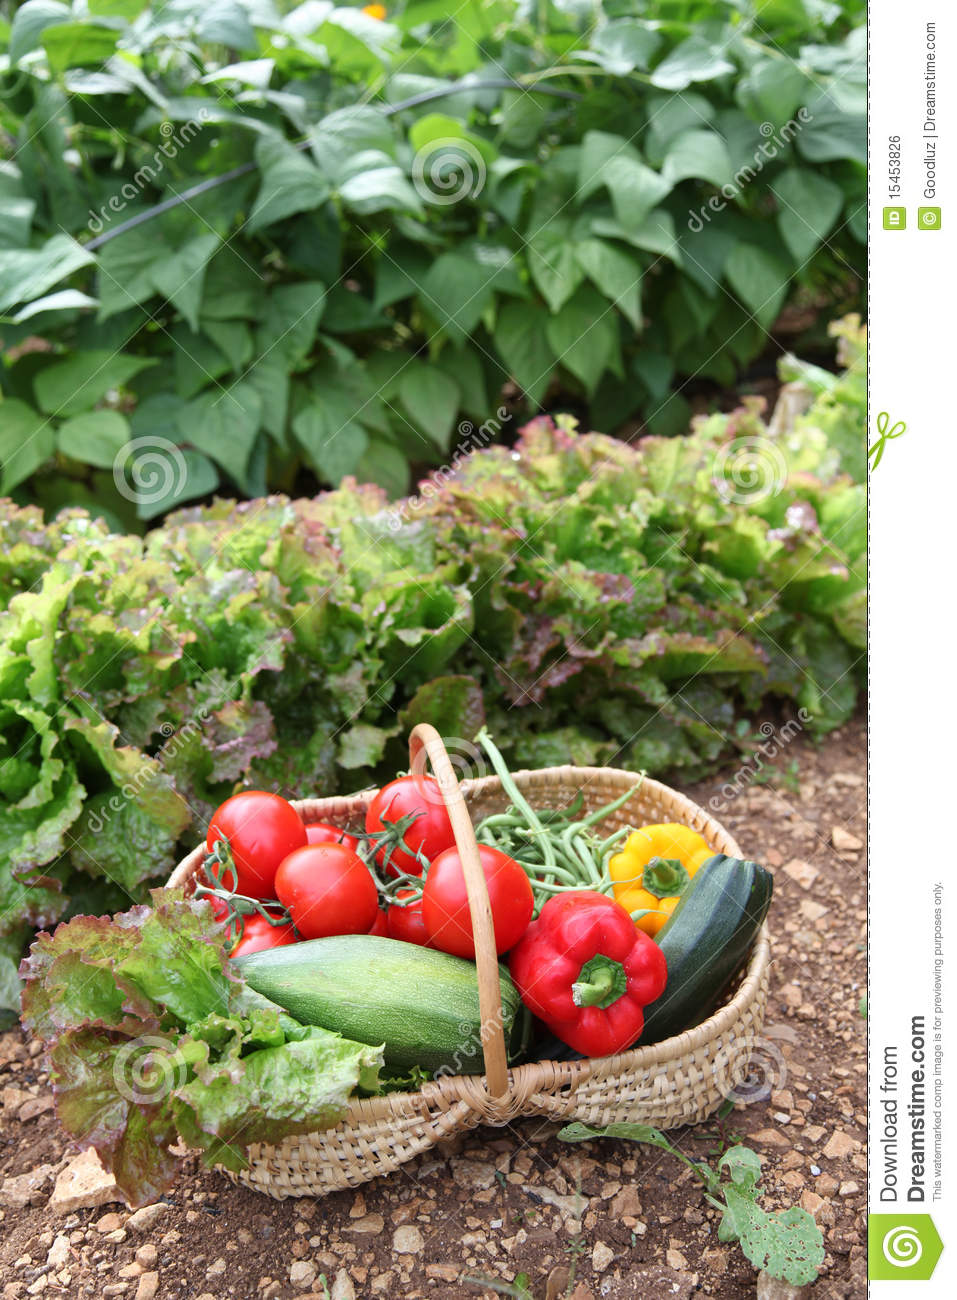 Summer Vegetables Royalty Free Stock Image   Image  15453826